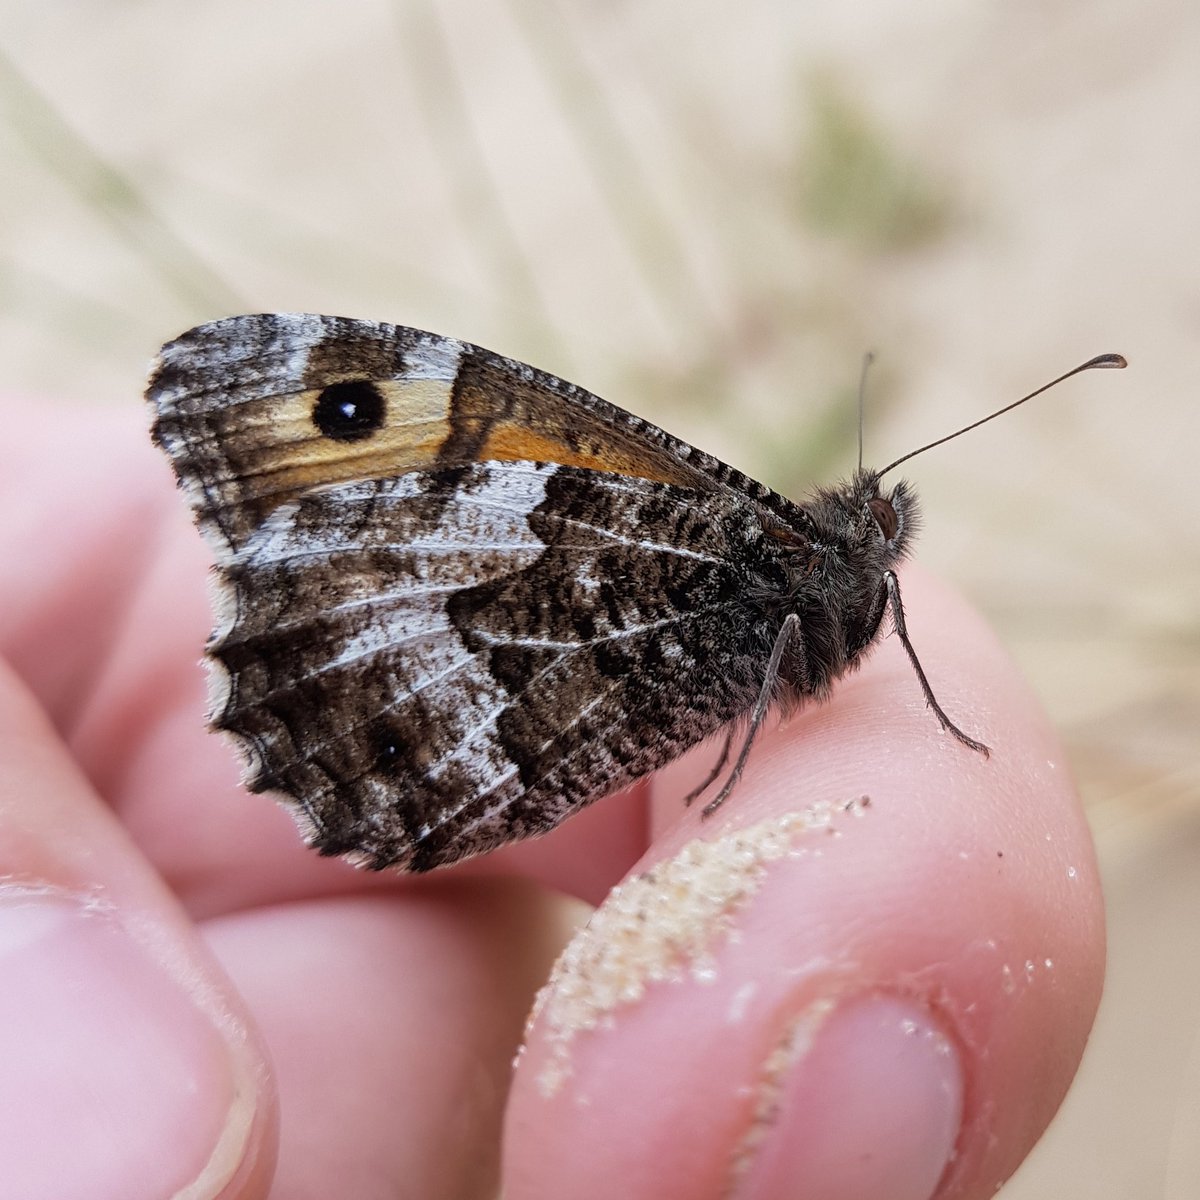 One of the best parts about my job! Being able to get up close to some amazing wildlife, including the usually timid #grayling #butterfly! 
#seenit 
@naturebftb @TheSeftonCoast